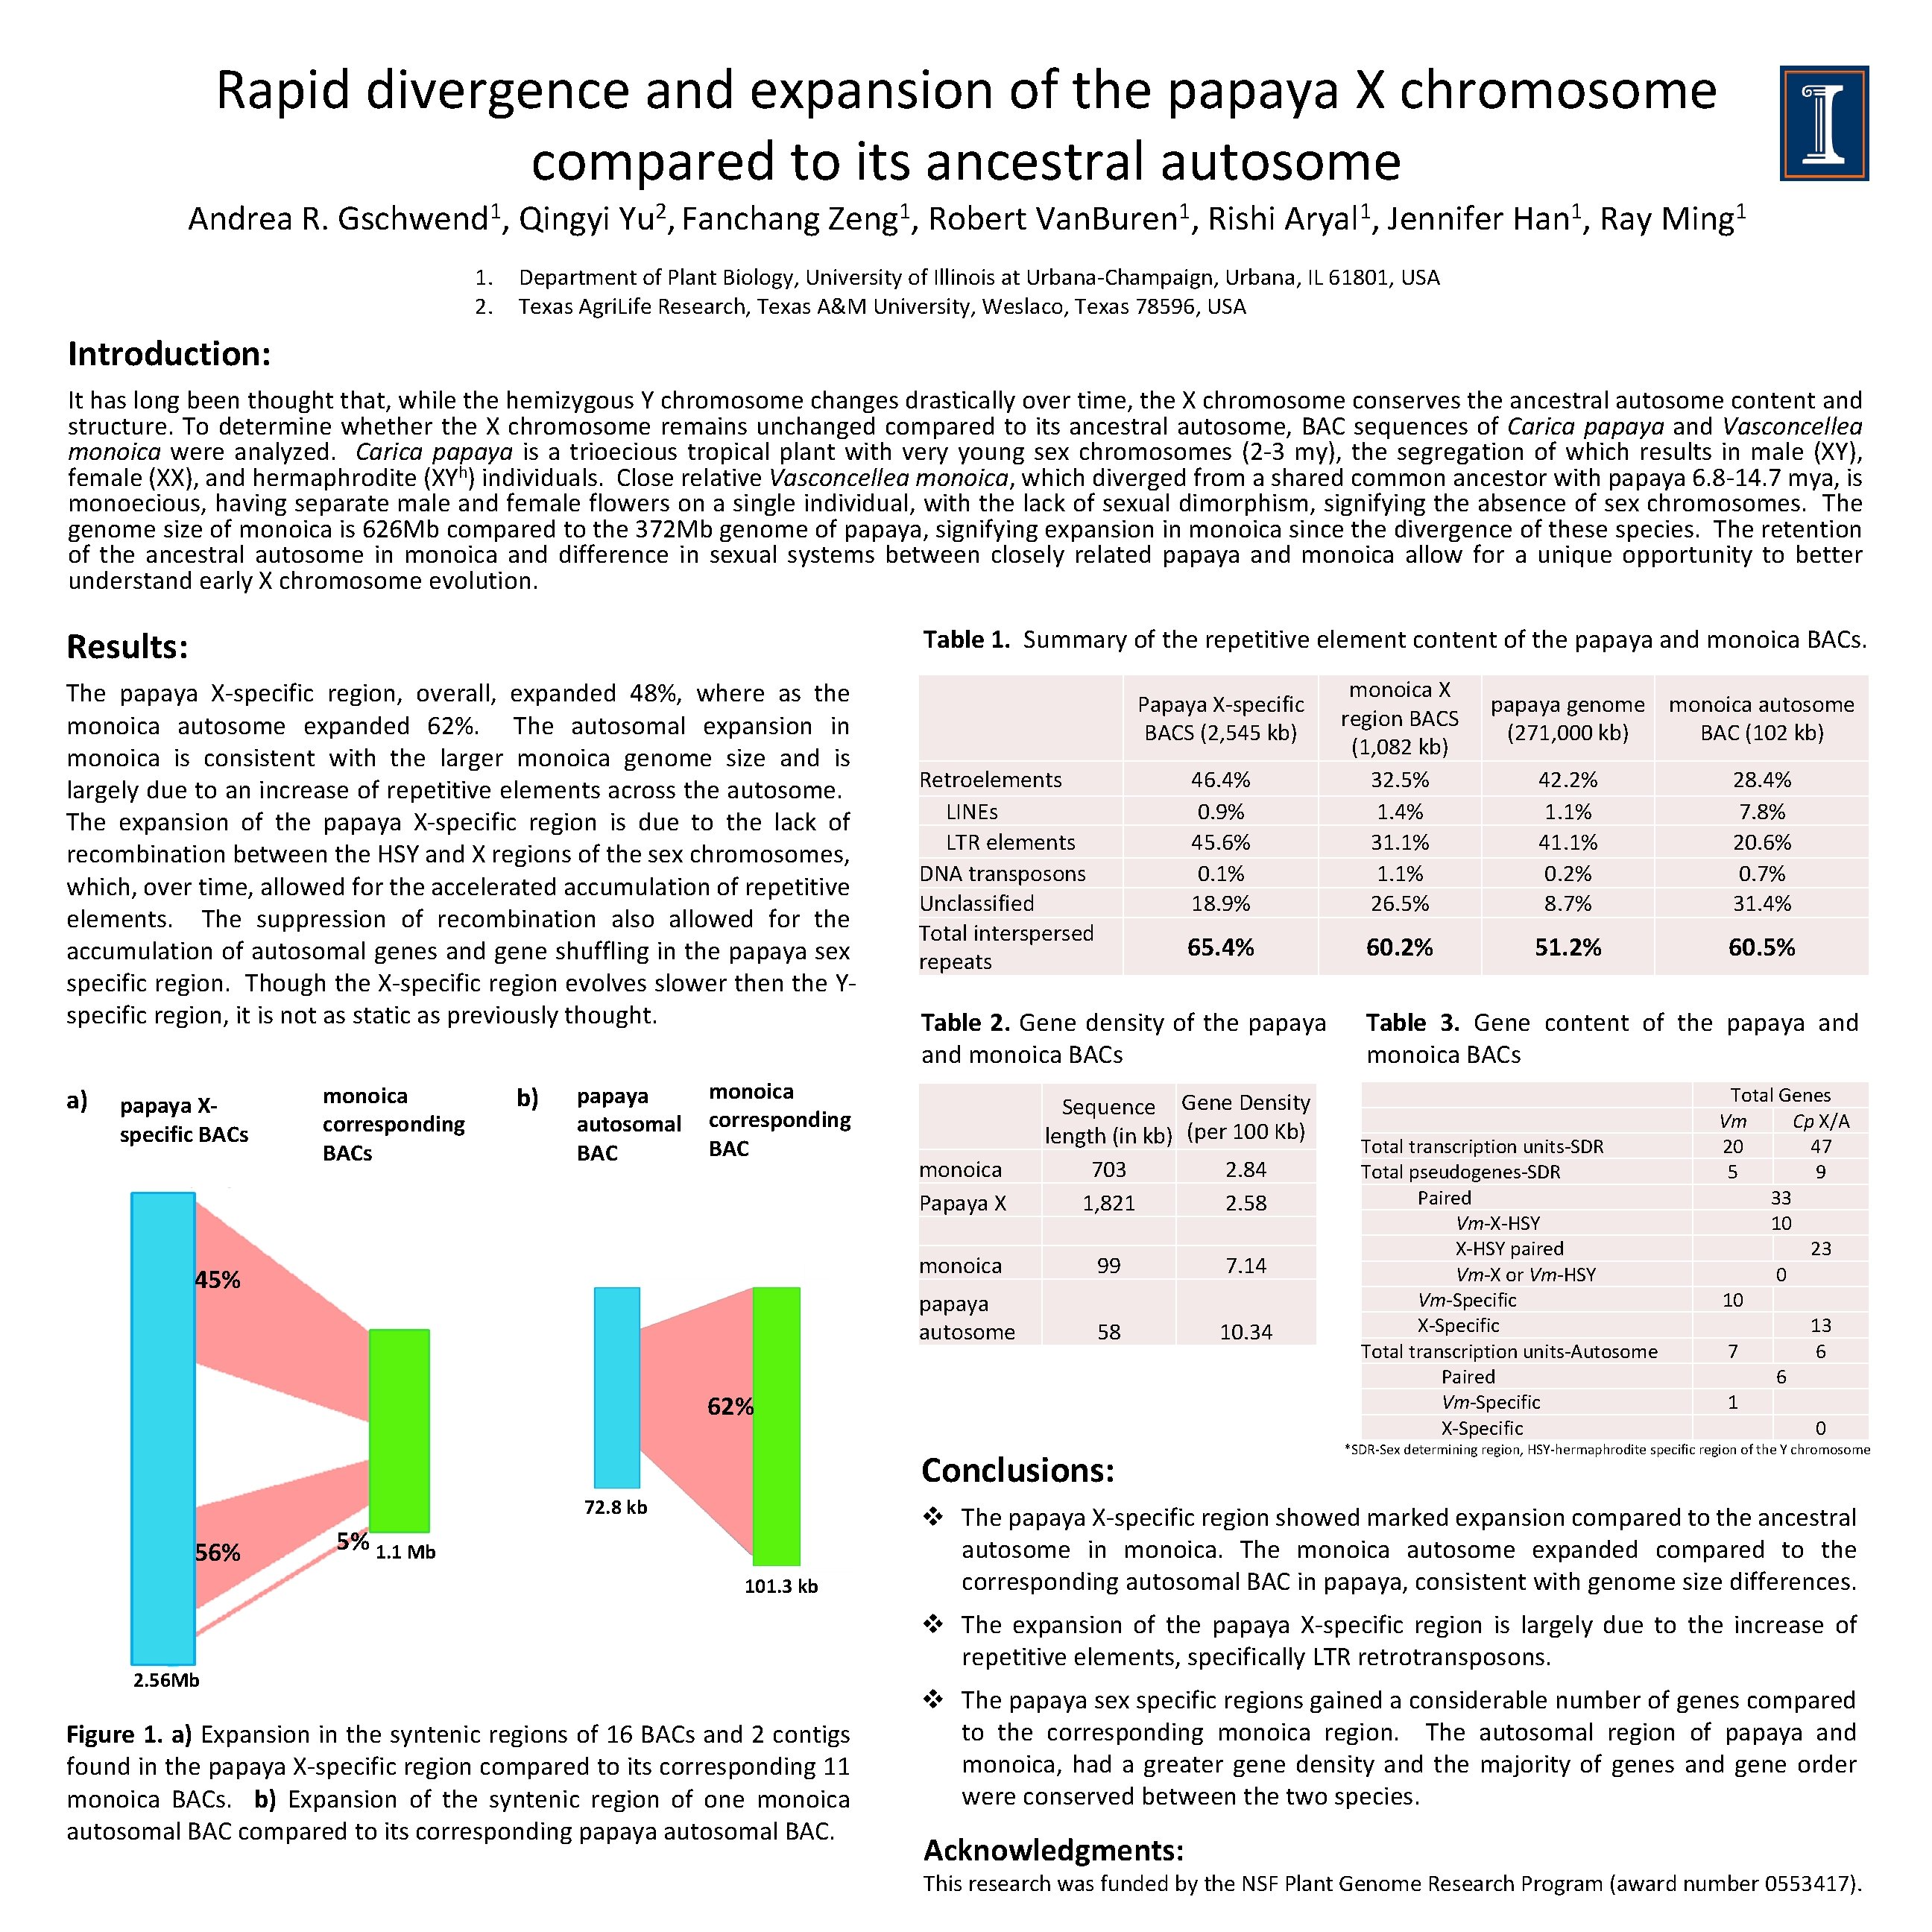 Rapid divergence and expansion of the papaya X chromosome compared to its ancestral autosome